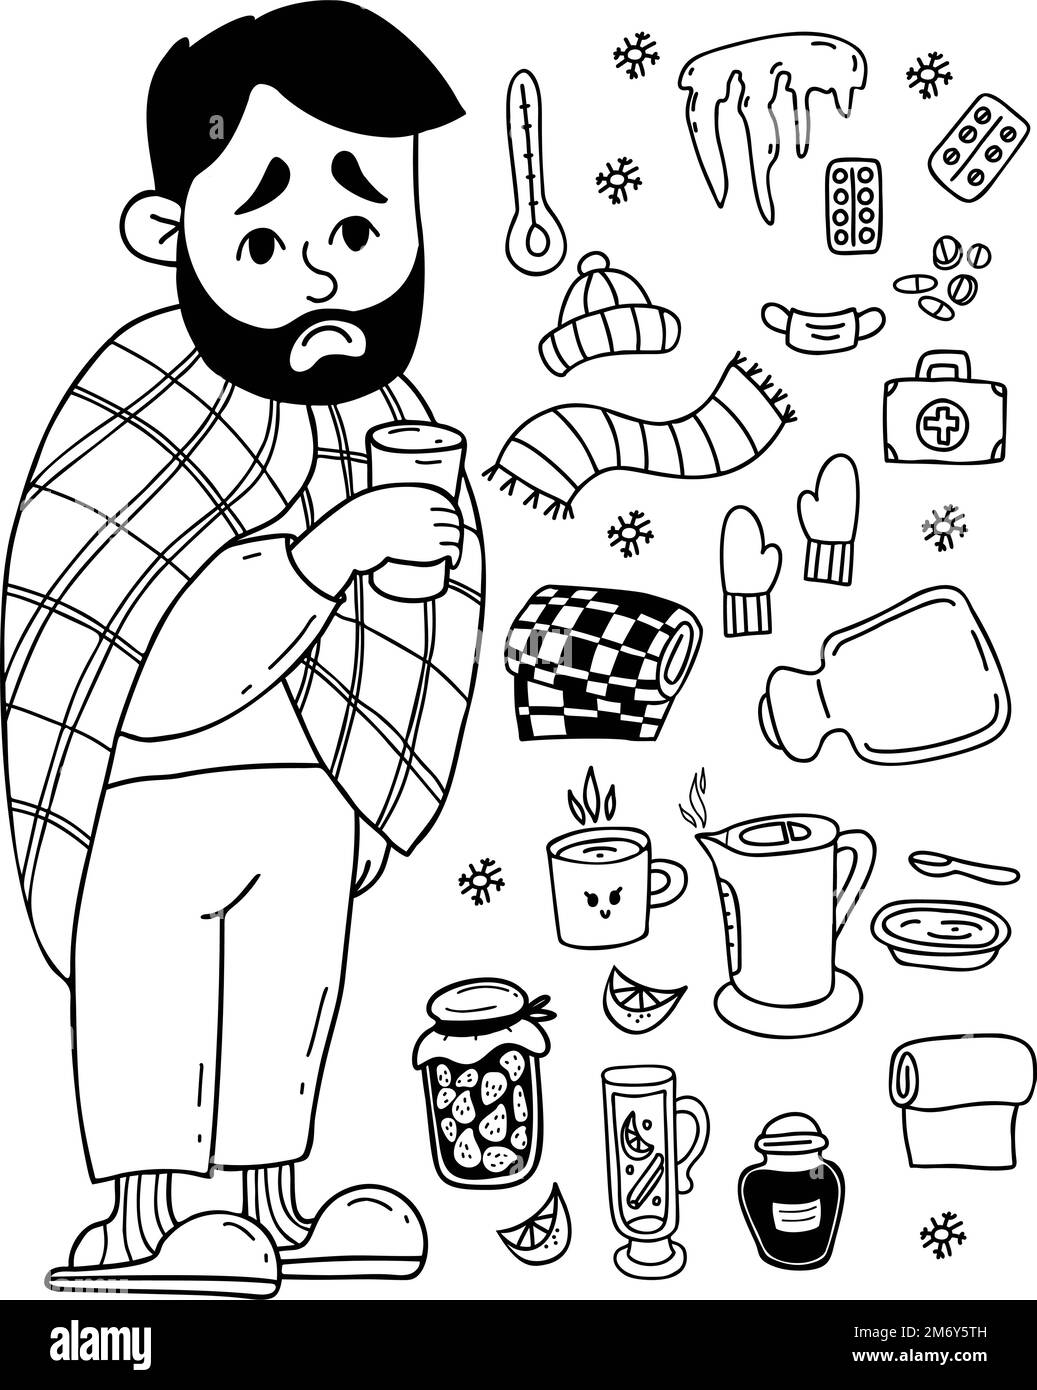 Sick sad bearded man wrapped in blanket with cup. collection of treatment items pills, scarf, hat, gloves, jam, kettle, mulled wine, heating pad and t Stock Vector